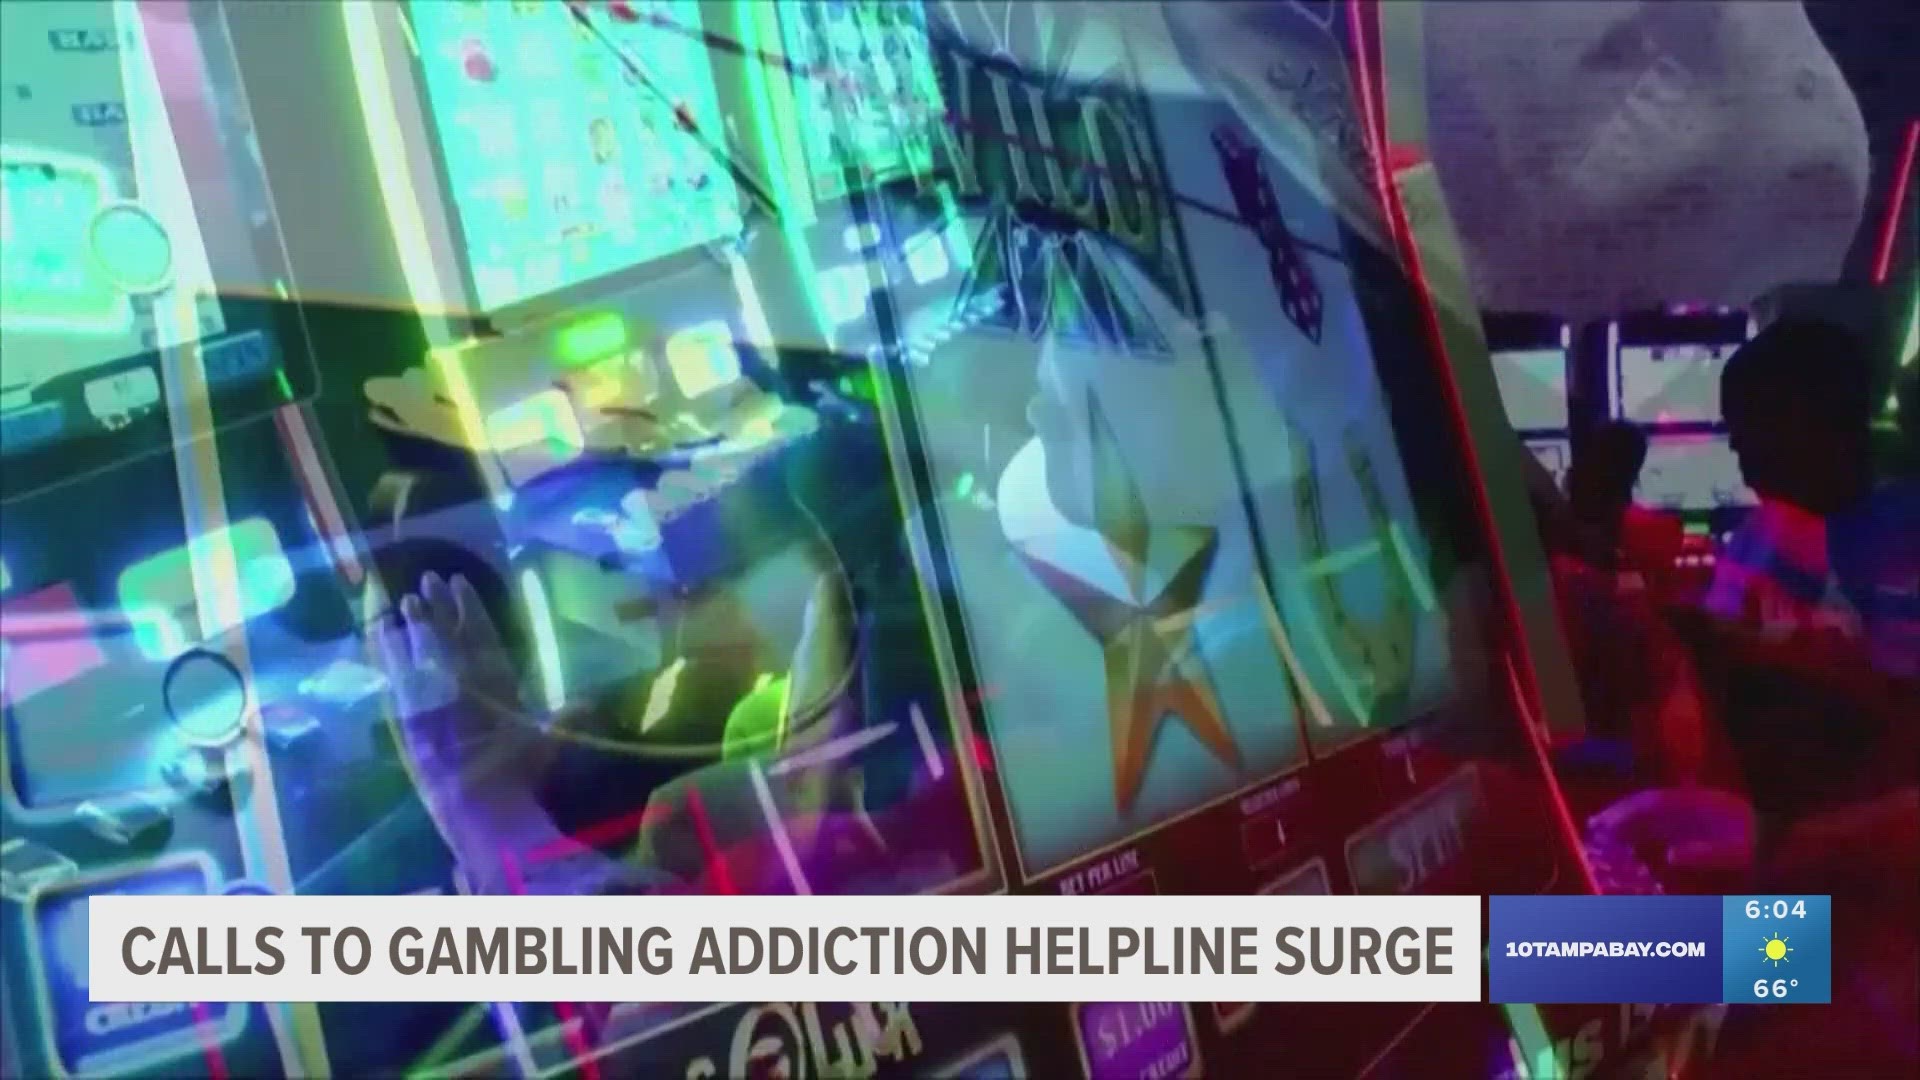 The Florida Council on Compulsive Gambling says its hotline has seen the number of calls for help surging by more than 130%.